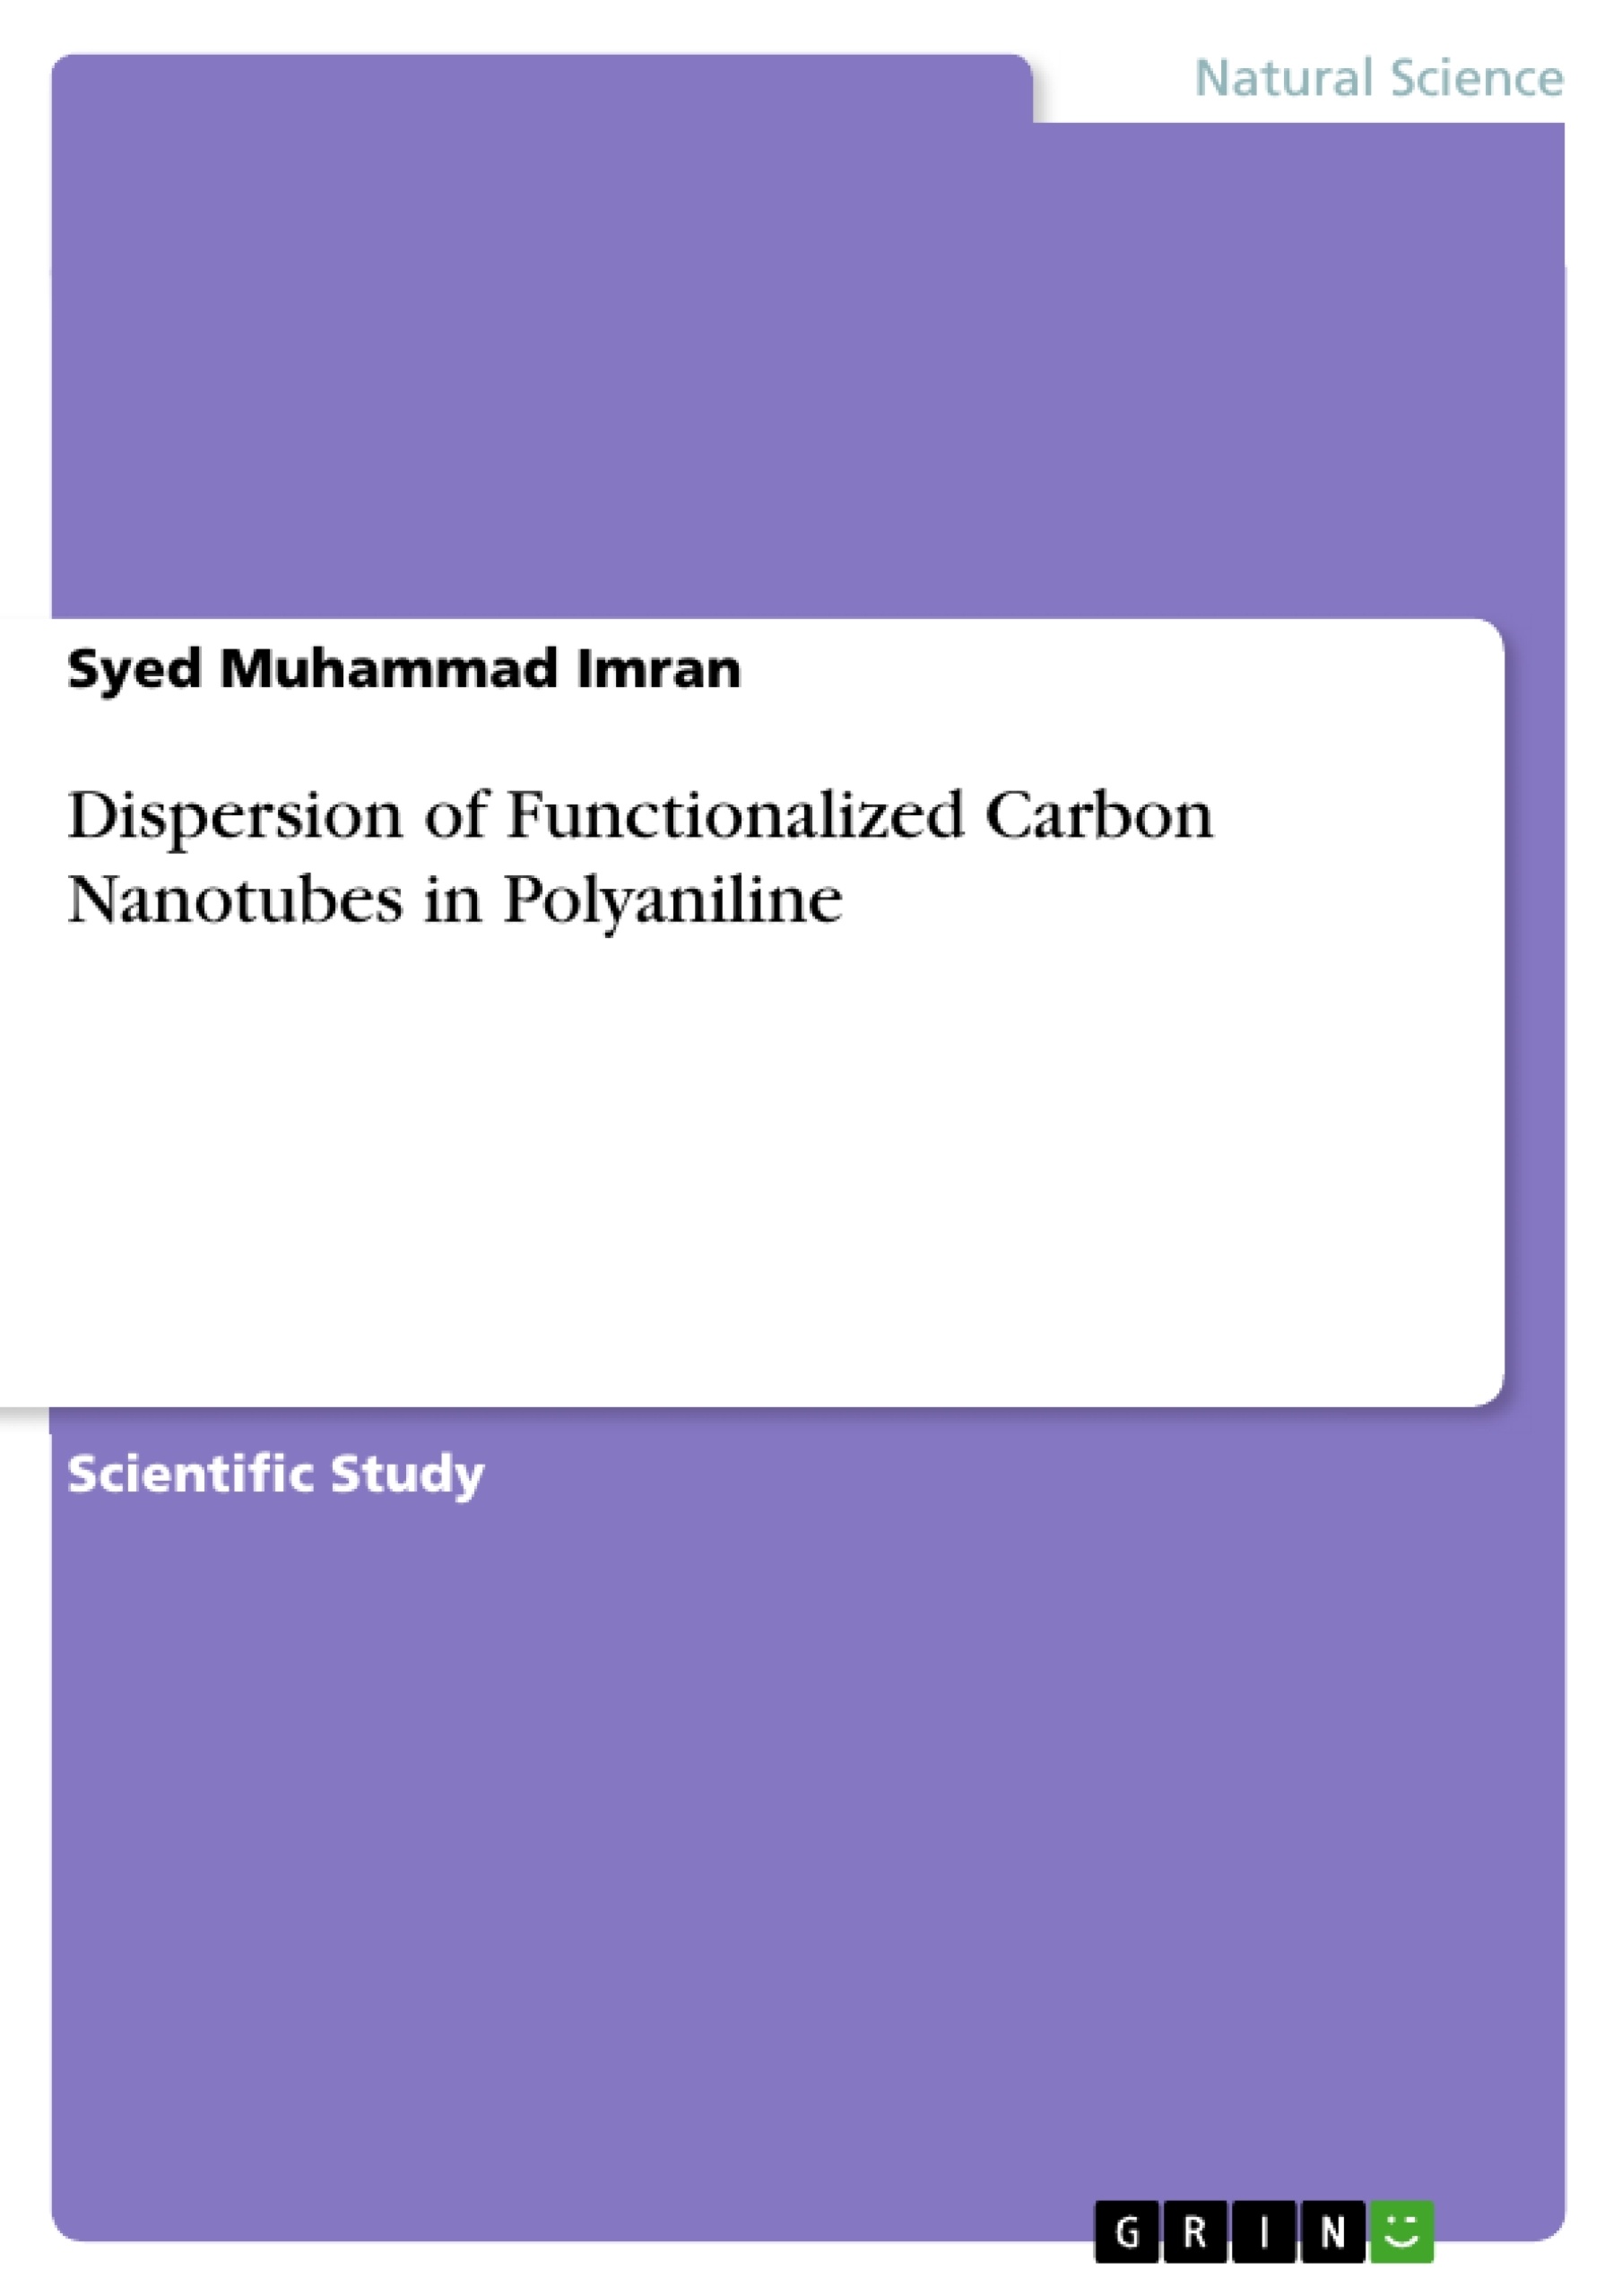 Title: Dispersion of Functionalized Carbon Nanotubes in Polyaniline